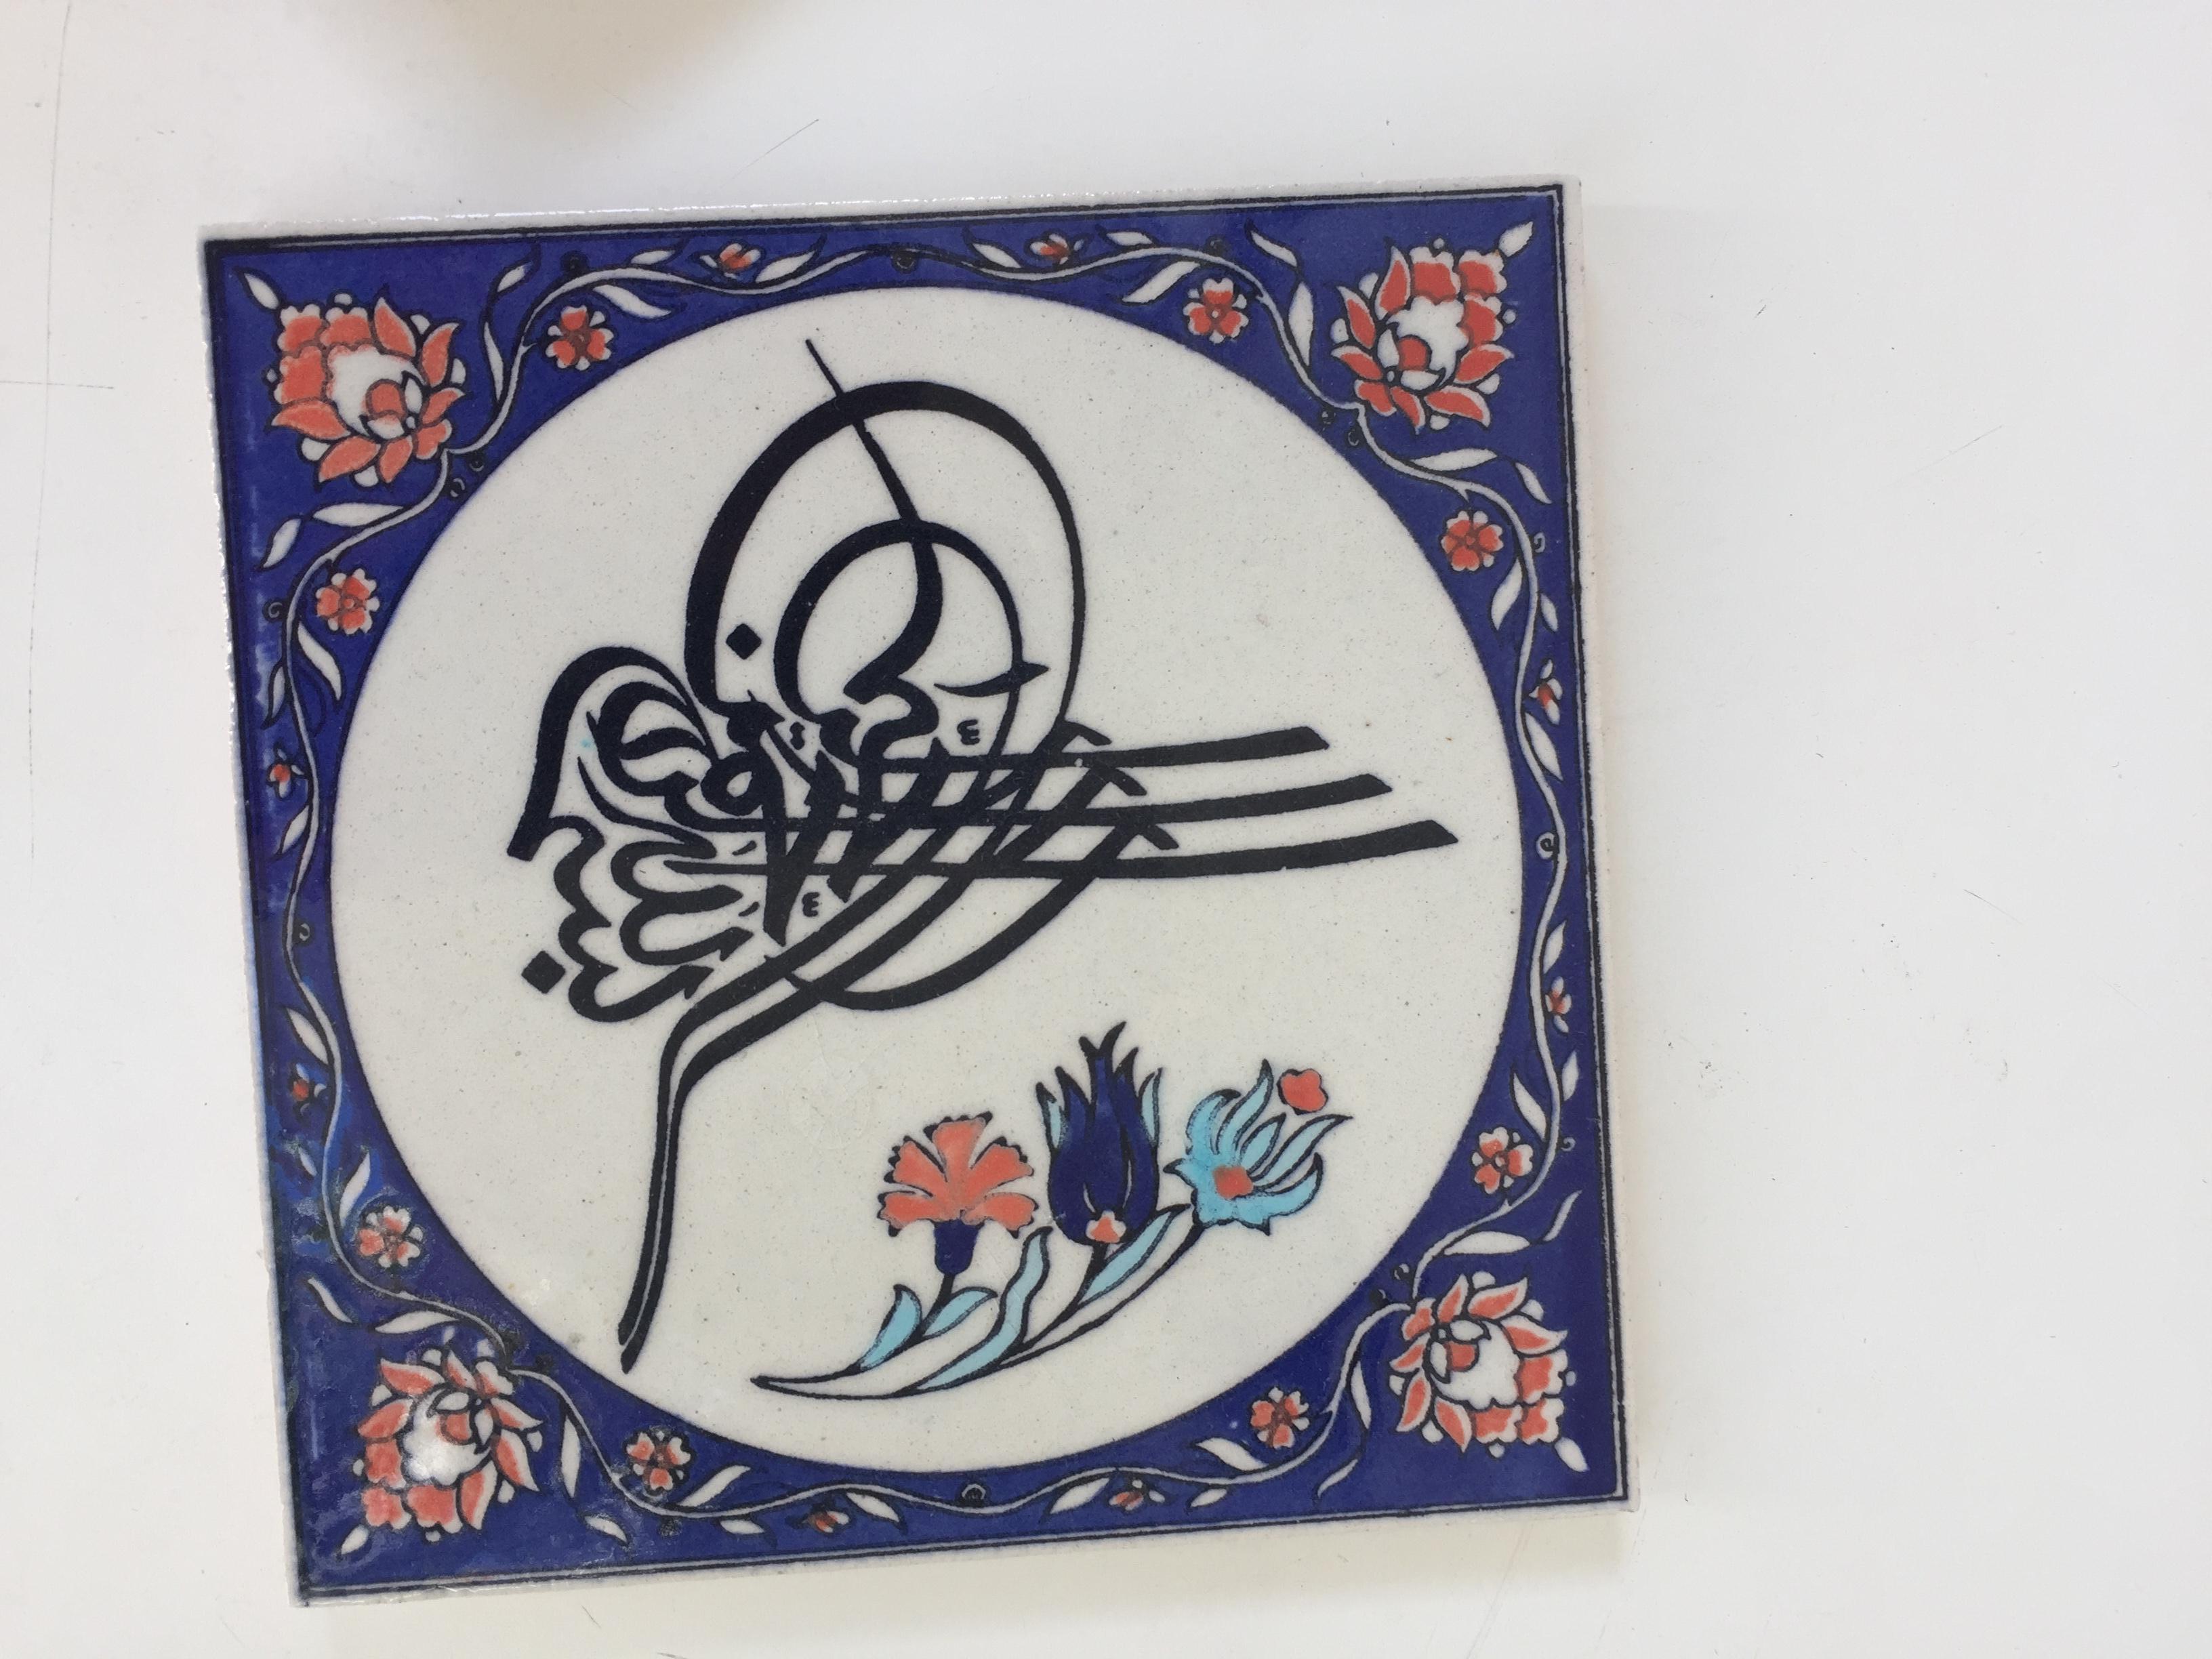 Turkish ceramic handcrafted decorative tile with hand painted Islamic Koranic blessing and floral design.
Ceramic tile hand painted with Arabic Islamic writing and flowers.
